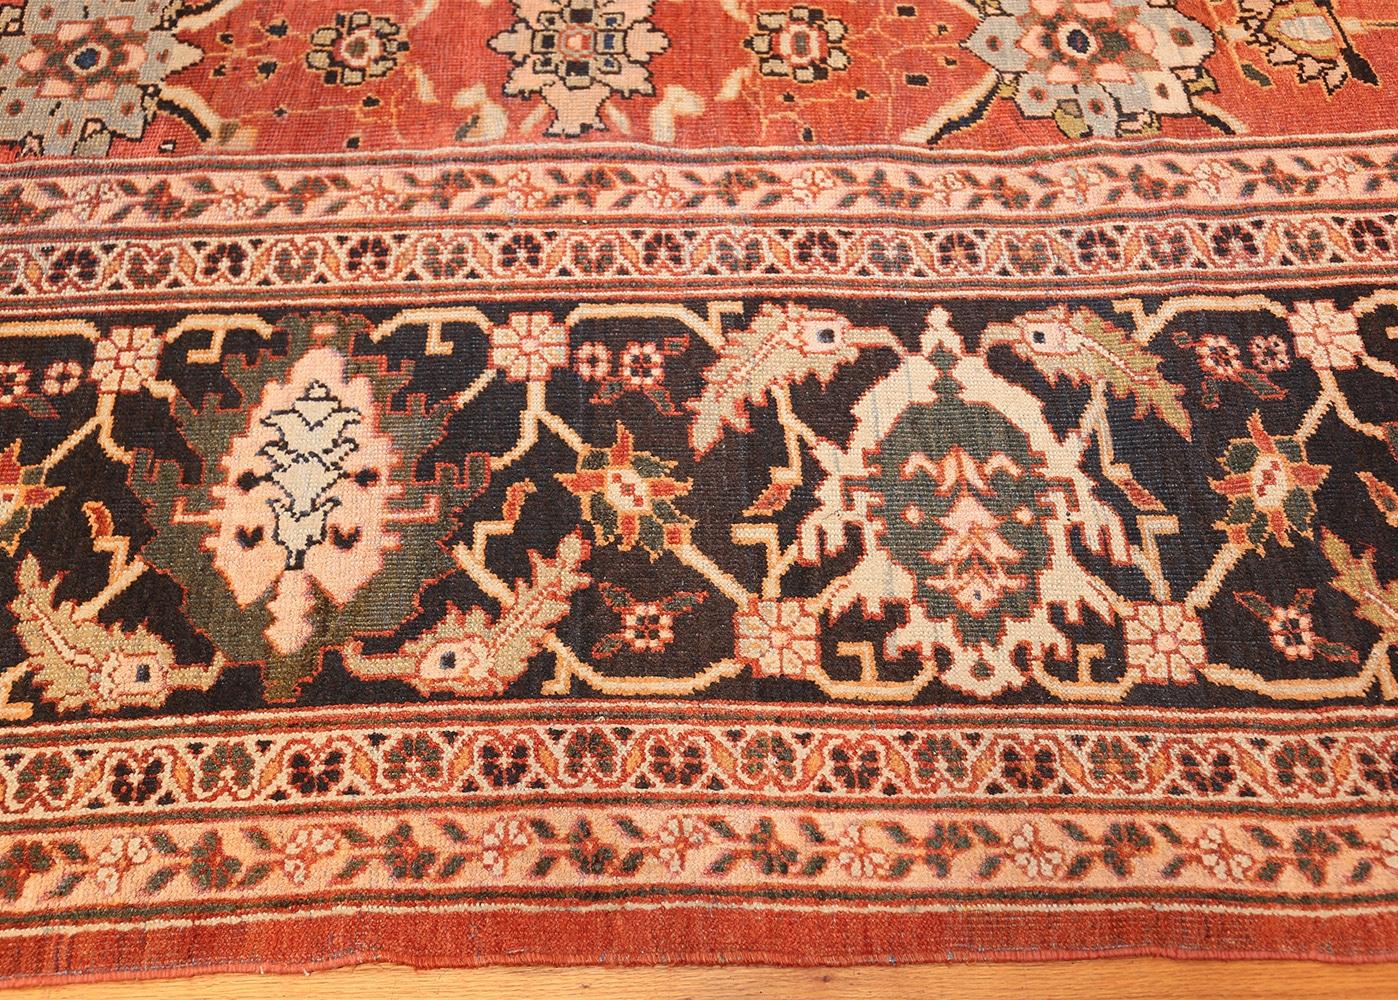 Beautiful Large Oversized Antique Persian Rust Color Sultanabad Rug, Country of Origin: Persia, Circa date: Late 19th Century. Size: 14 ft 5 in x 21 ft 9 in (4.39 m x 6.63 m)

